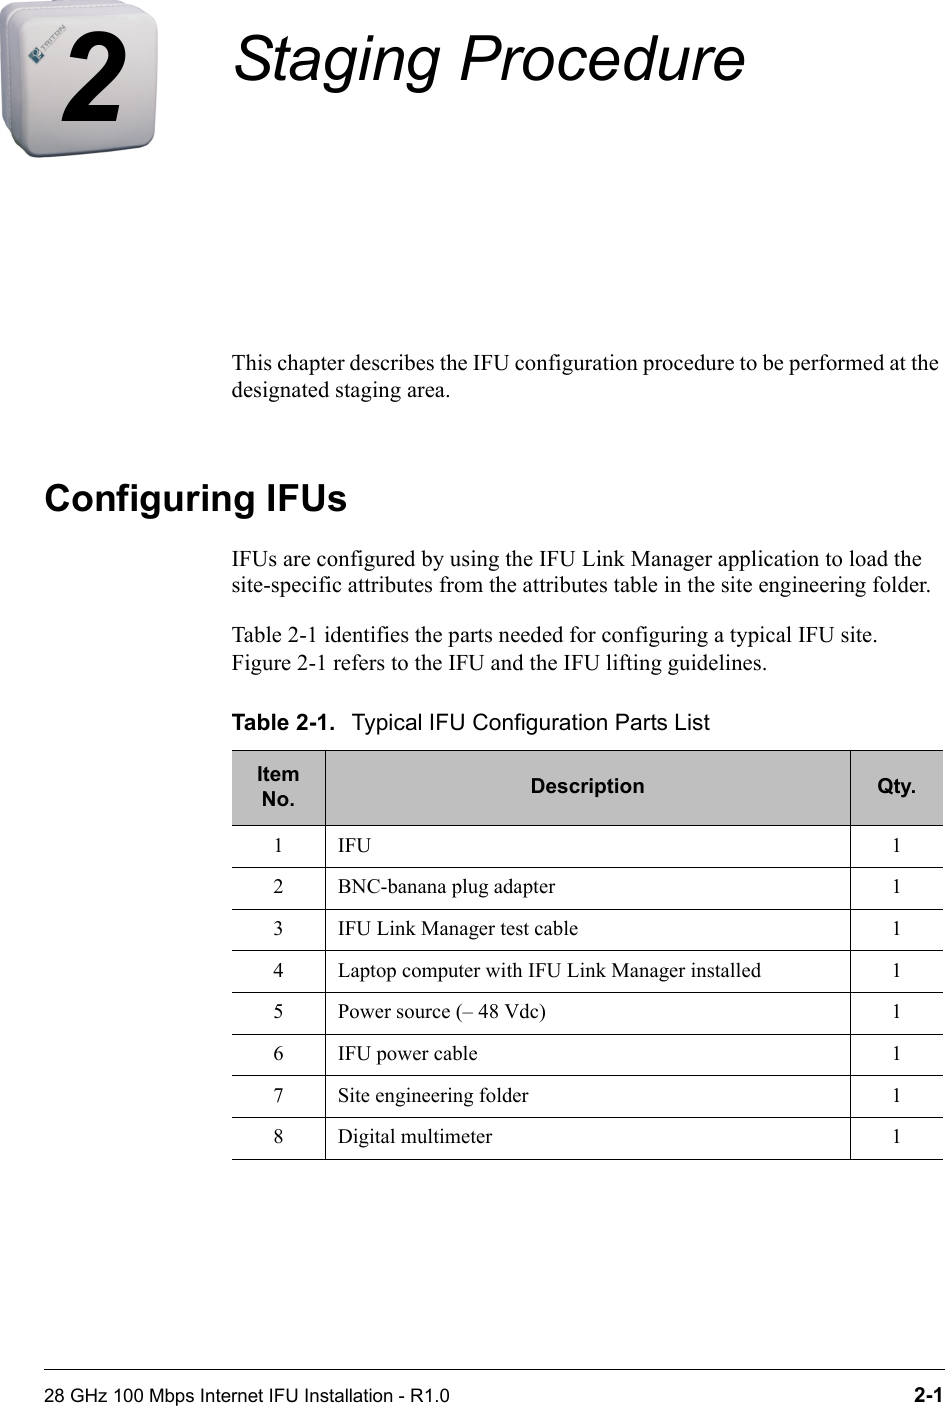 28 GHz 100 Mbps Internet IFU Installation - R1.0 2-12Staging ProcedureThis chapter describes the IFU configuration procedure to be performed at the designated staging area.Configuring IFUsIFUs are configured by using the IFU Link Manager application to load the site-specific attributes from the attributes table in the site engineering folder. Table 2-1 identifies the parts needed for configuring a typical IFU site. Figure 2-1 refers to the IFU and the IFU lifting guidelines. Table 2-1. Typical IFU Configuration Parts ListItem No. Description Qty.1IFU 12 BNC-banana plug adapter 13 IFU Link Manager test cable  14 Laptop computer with IFU Link Manager installed 15 Power source (– 48 Vdc)  16 IFU power cable 17 Site engineering folder 18 Digital multimeter 1